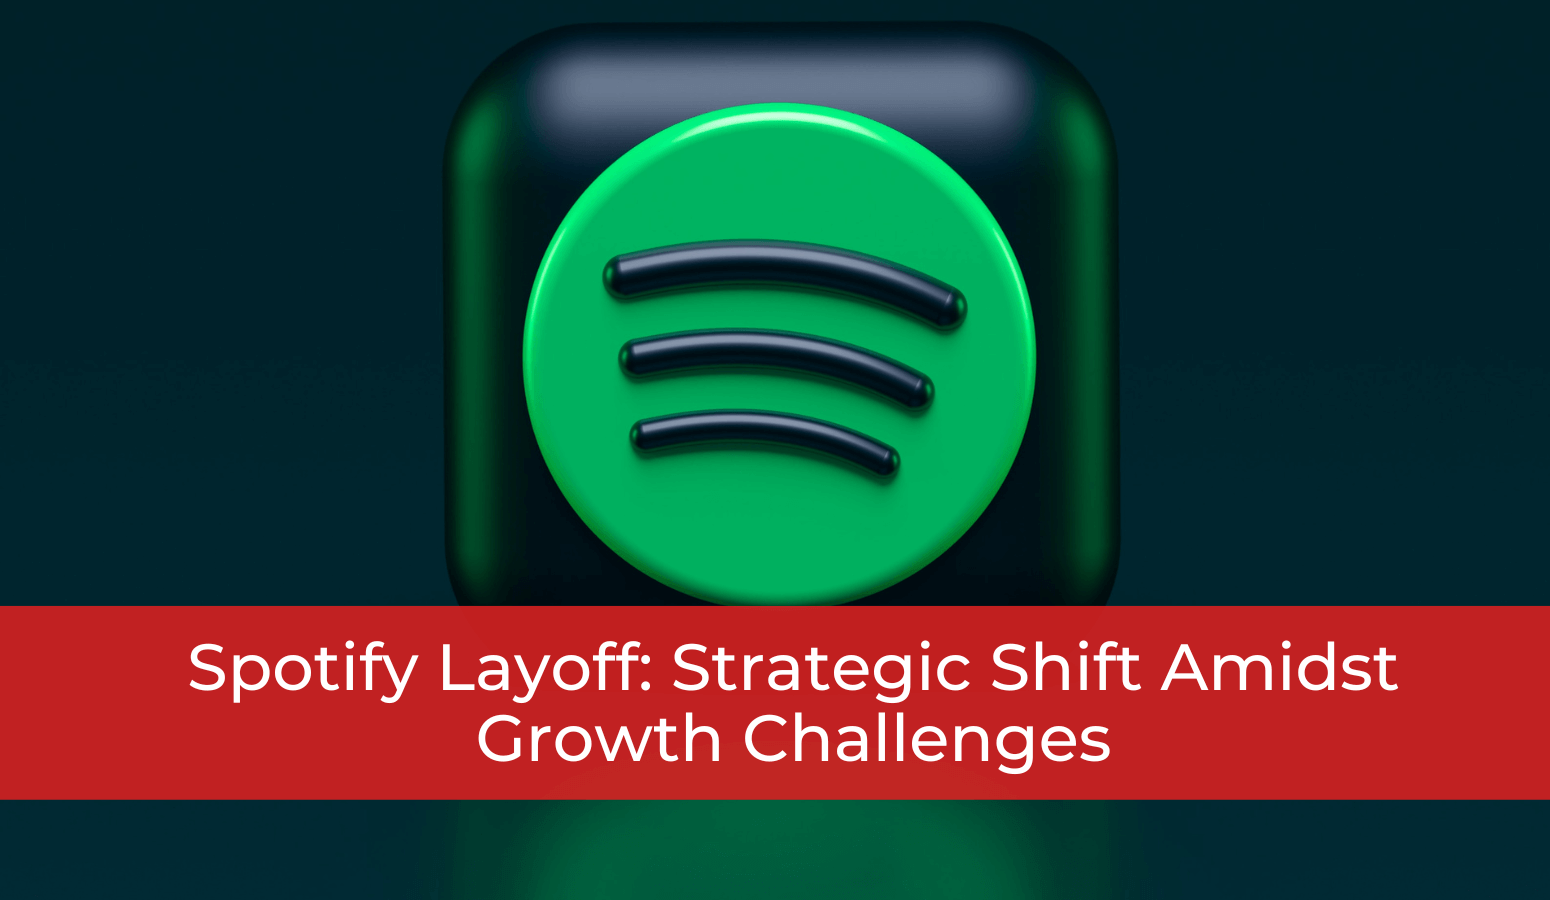 Featured image for “Spotify Layoff: Strategic Shift Amidst Growth Challenges”